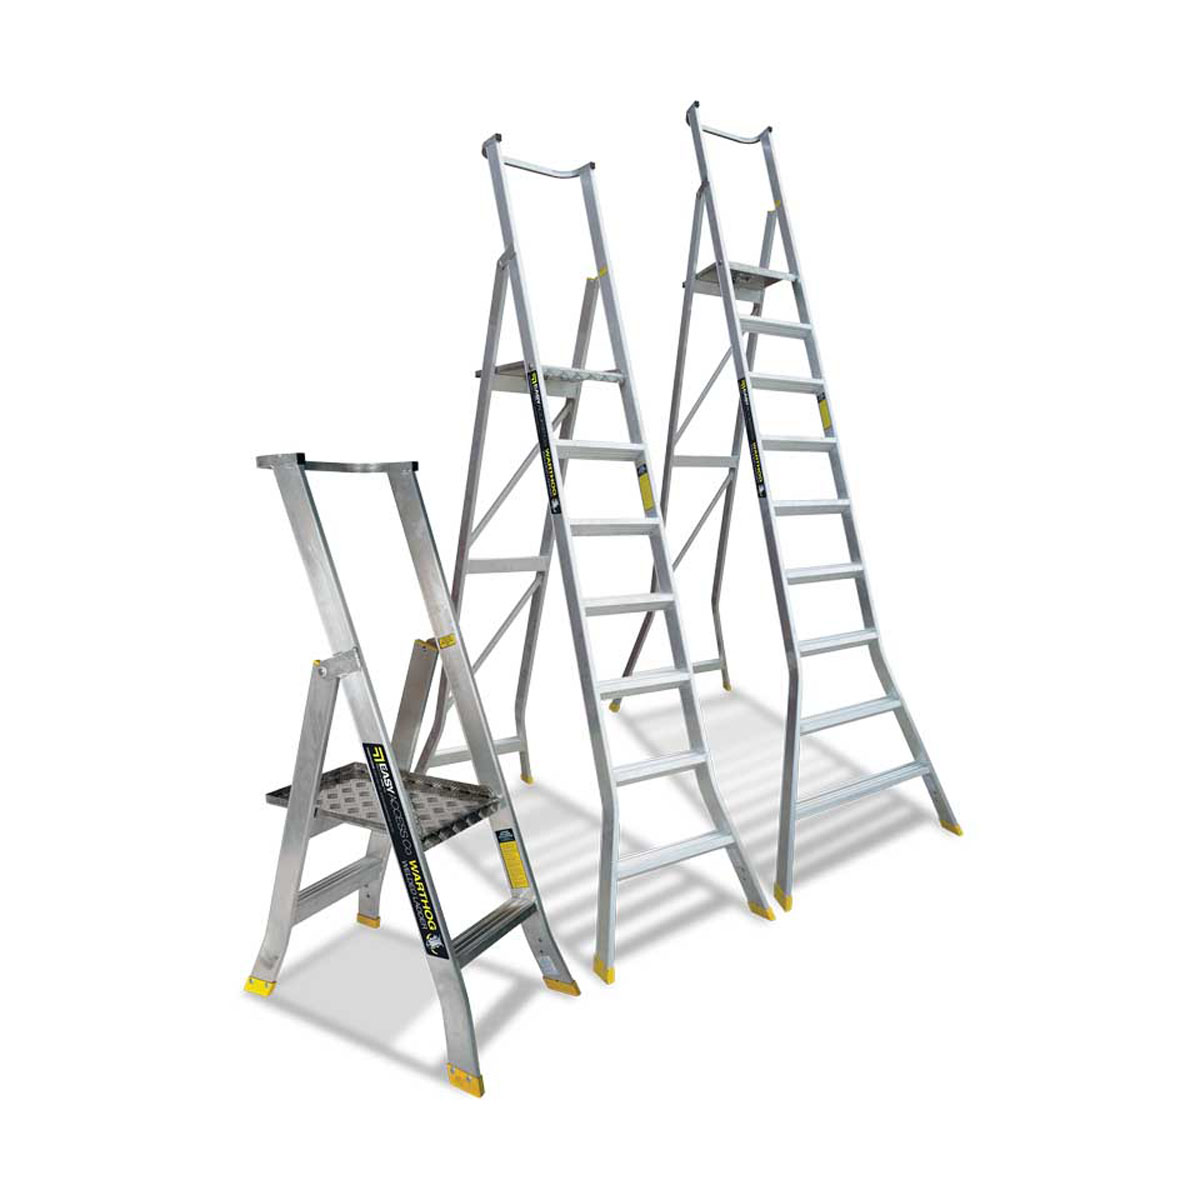 Buy Platform Ladders - Heavy-Duty available at Astrolift NZ